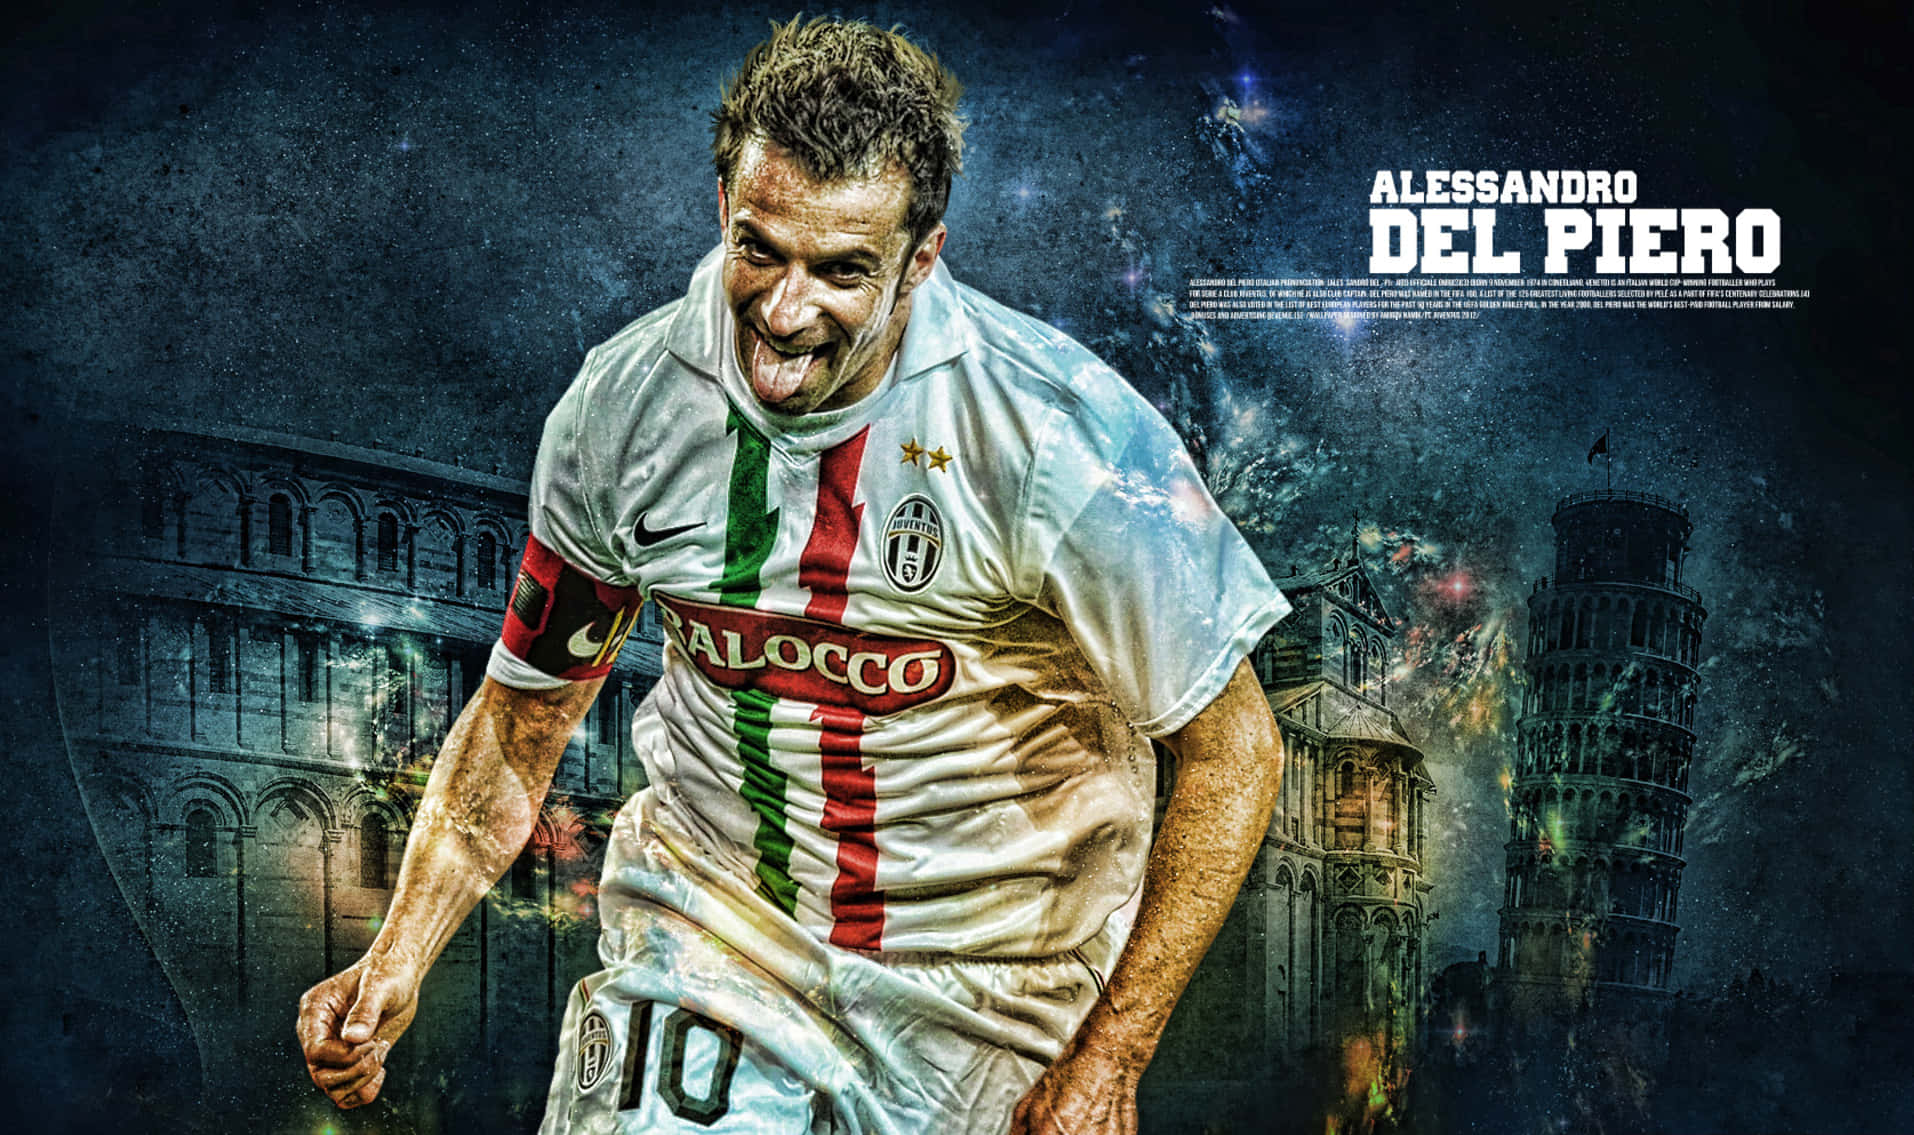 Alessandro Del Piero In Action During A Football Match Wallpaper